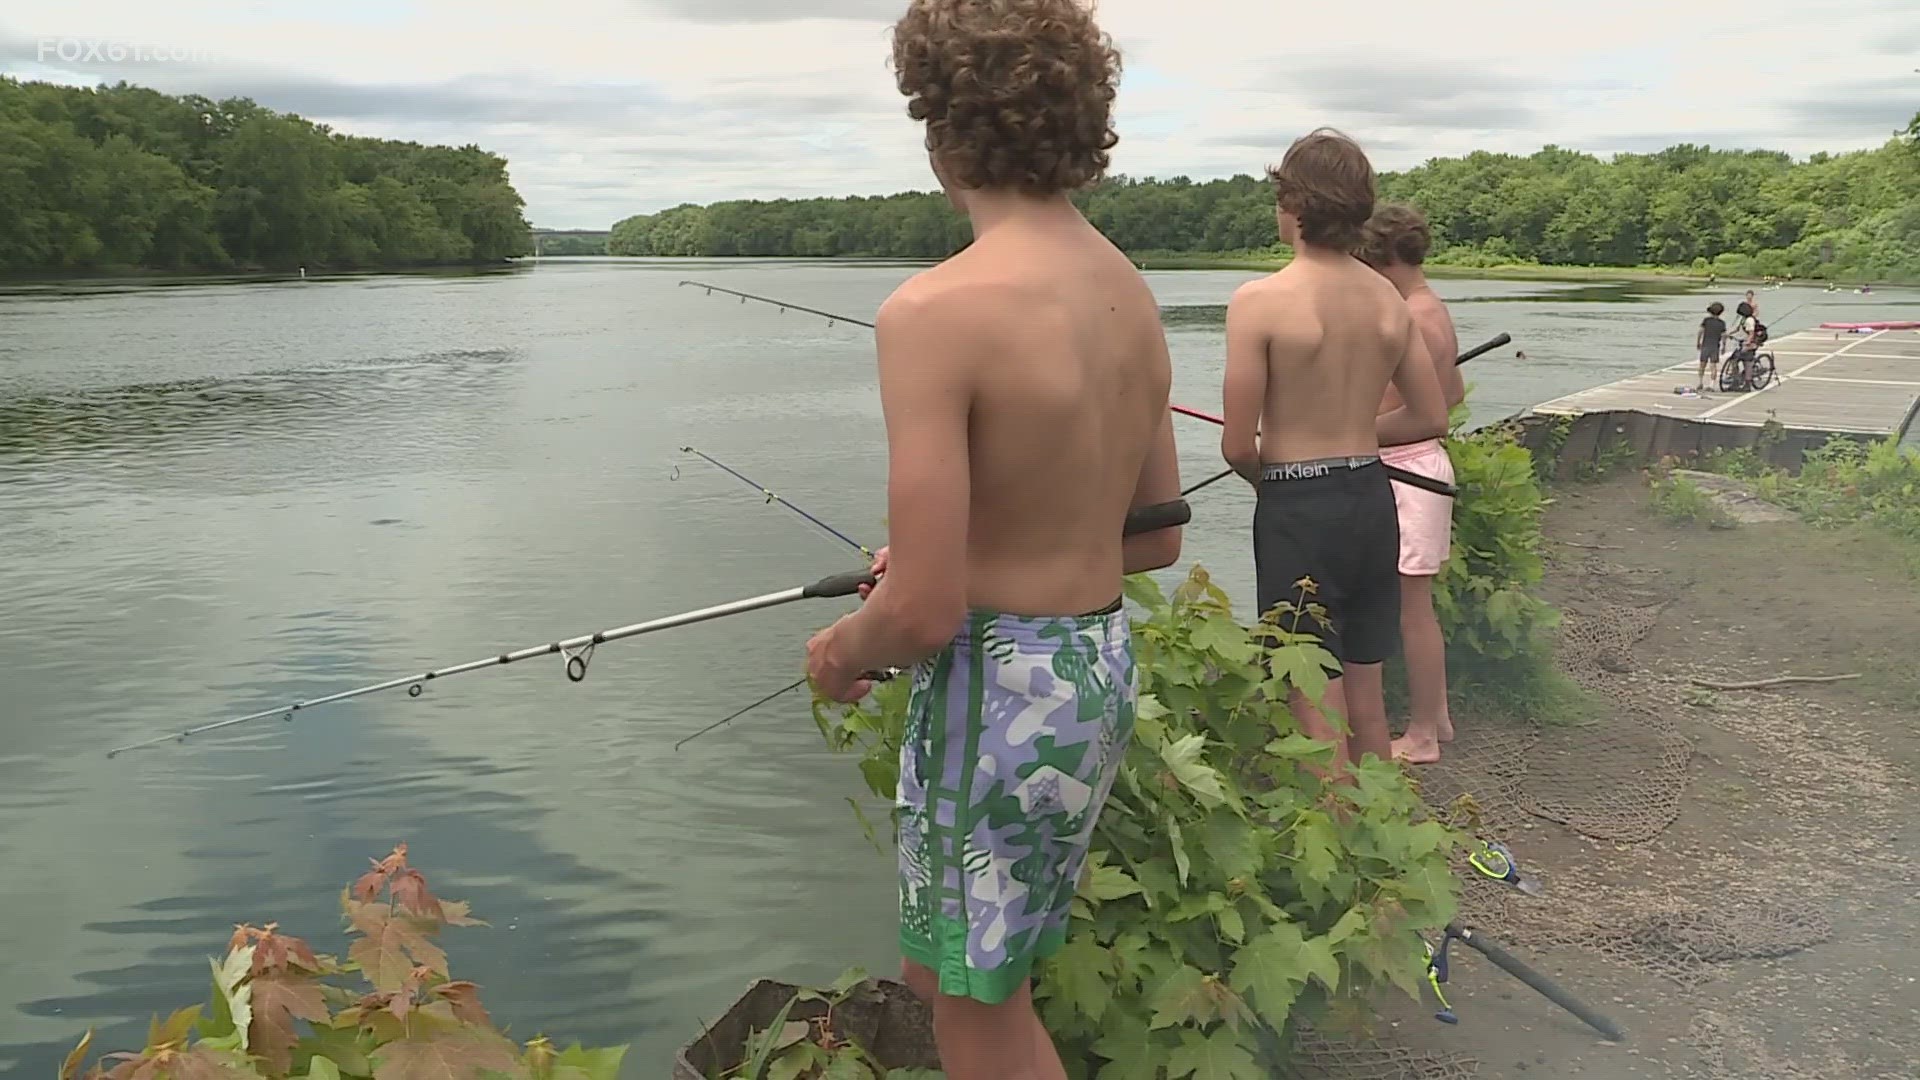 The CT Department of Public Health issued a fish advisory to warn people on limiting the number of fish they eat from the CT River.